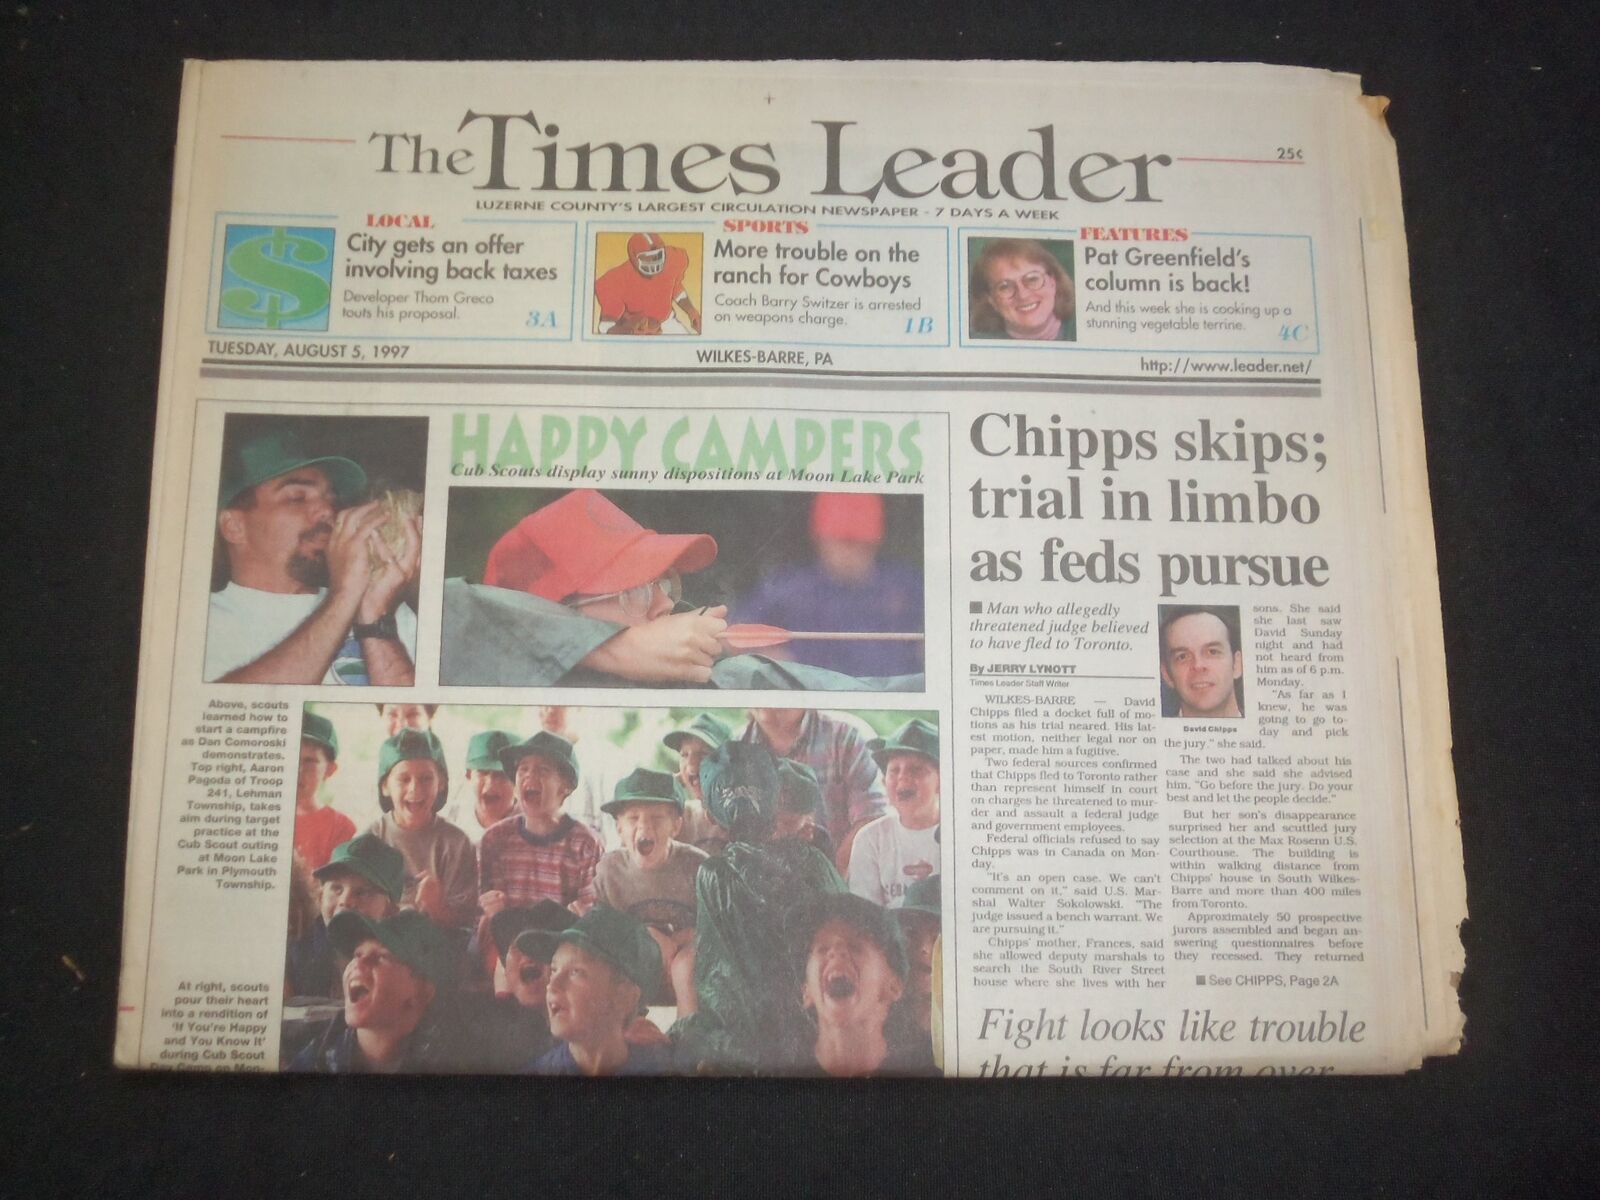 1997 AUGUST 5 WILKES-BARRE TIMES LEADER - DAVID CHIPPS TRIAL IN LIMBO - NP 7760